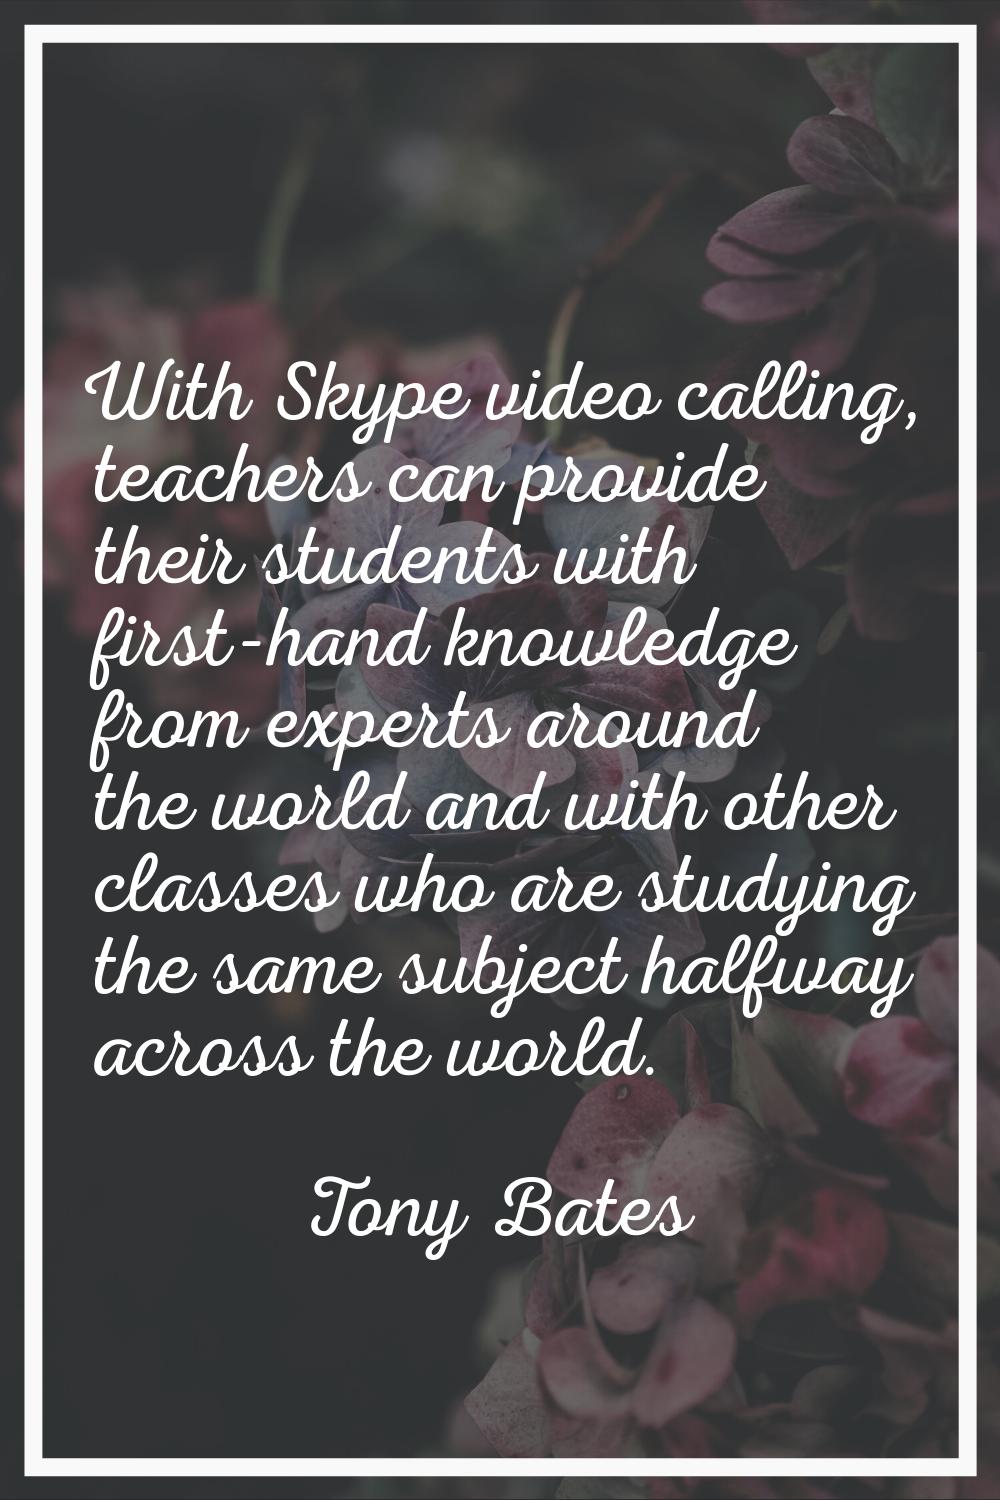 With Skype video calling, teachers can provide their students with first-hand knowledge from expert